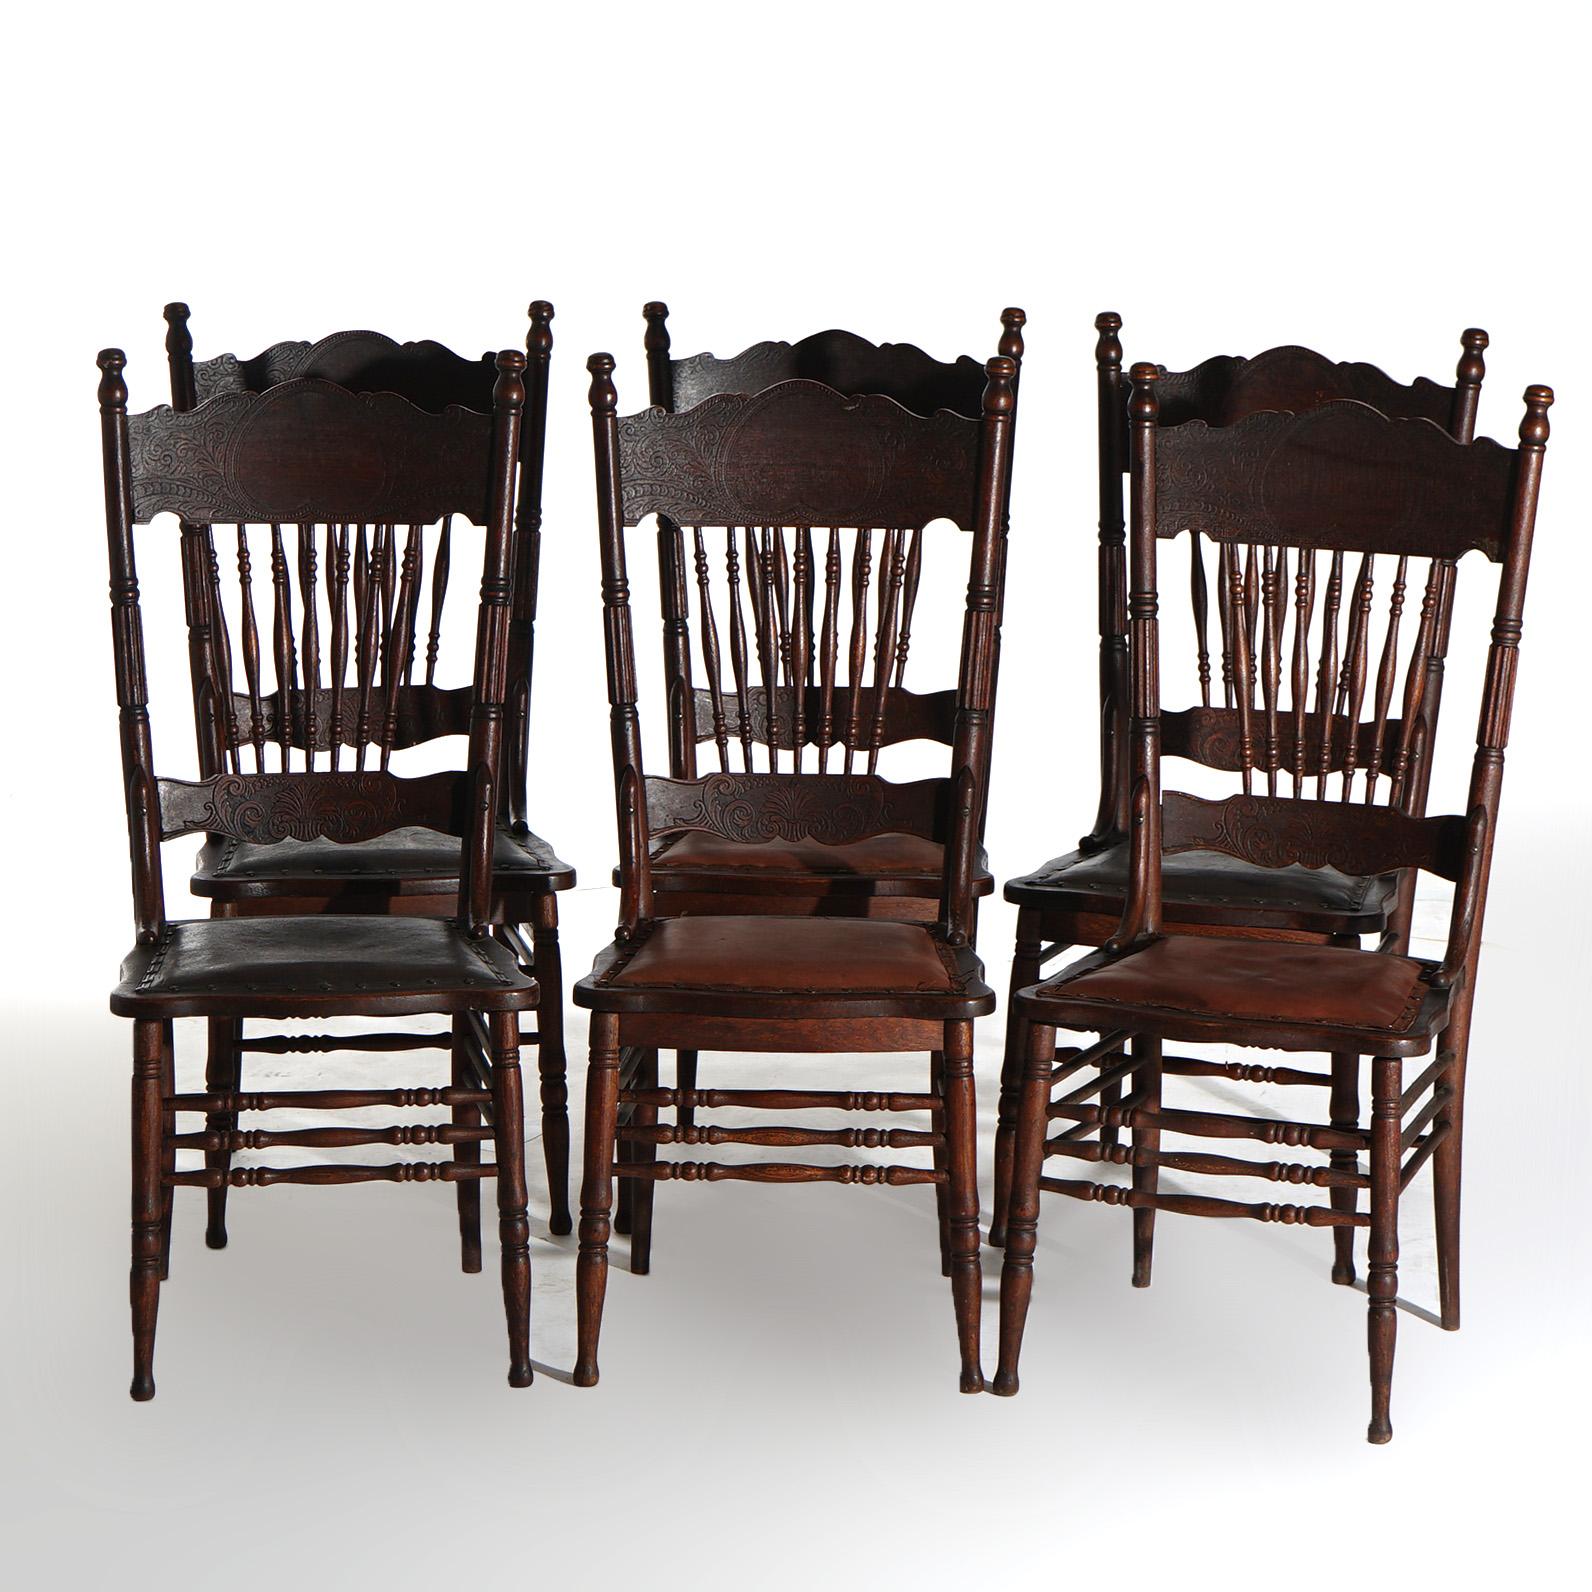 An Antique Set of Six Oak Larkin Reverse Heart Shape Spindle & Pressed Back Dining Chairs Circa 1900

Measures - 43